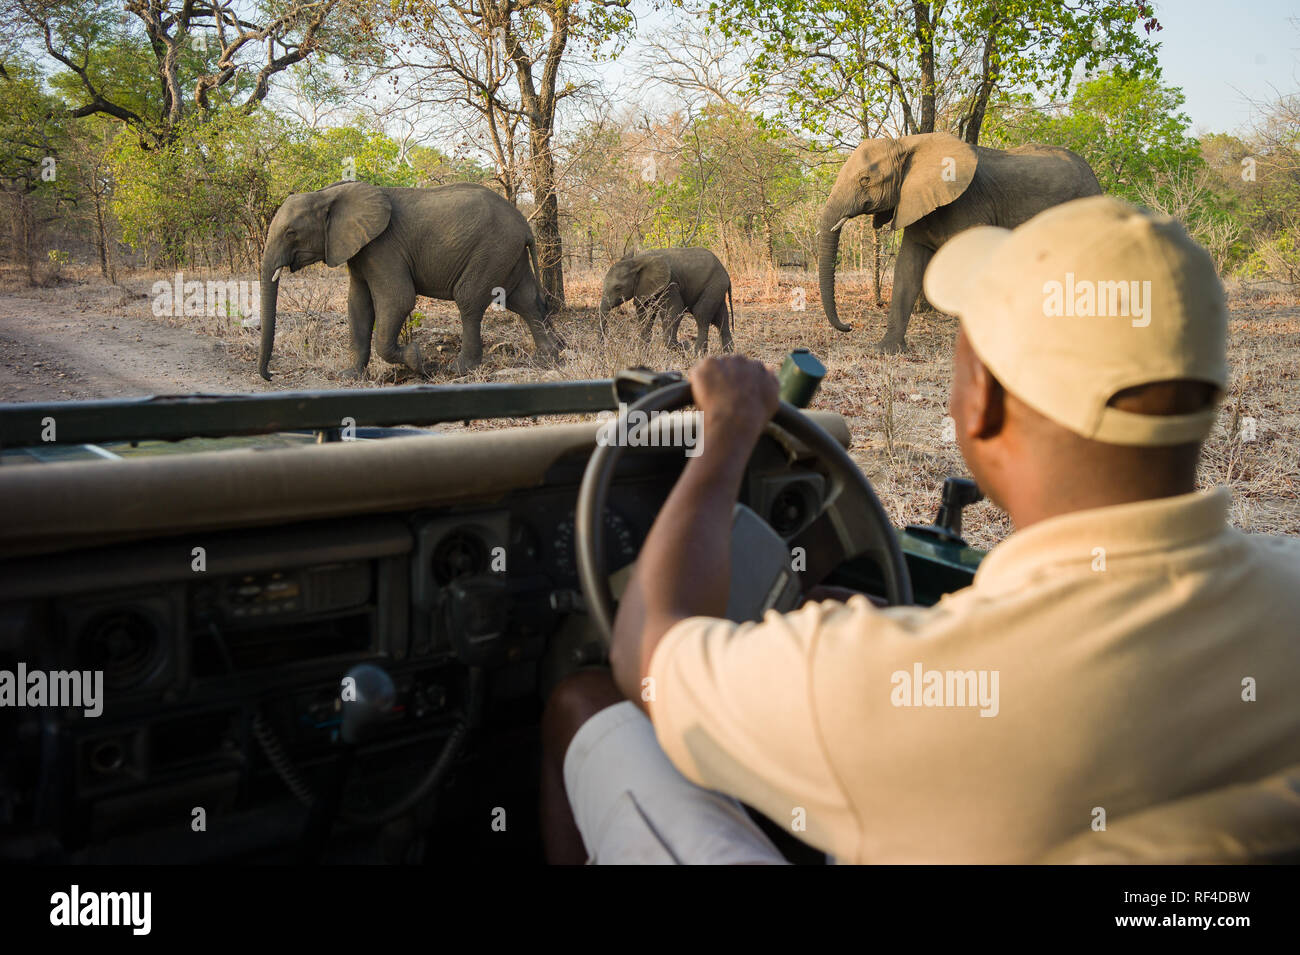 A safari guide stops his vehicle to let an elephant family, Loxodonta africana, with a young calf, cross the road in Majete Wildlife Reserve Stock Photo